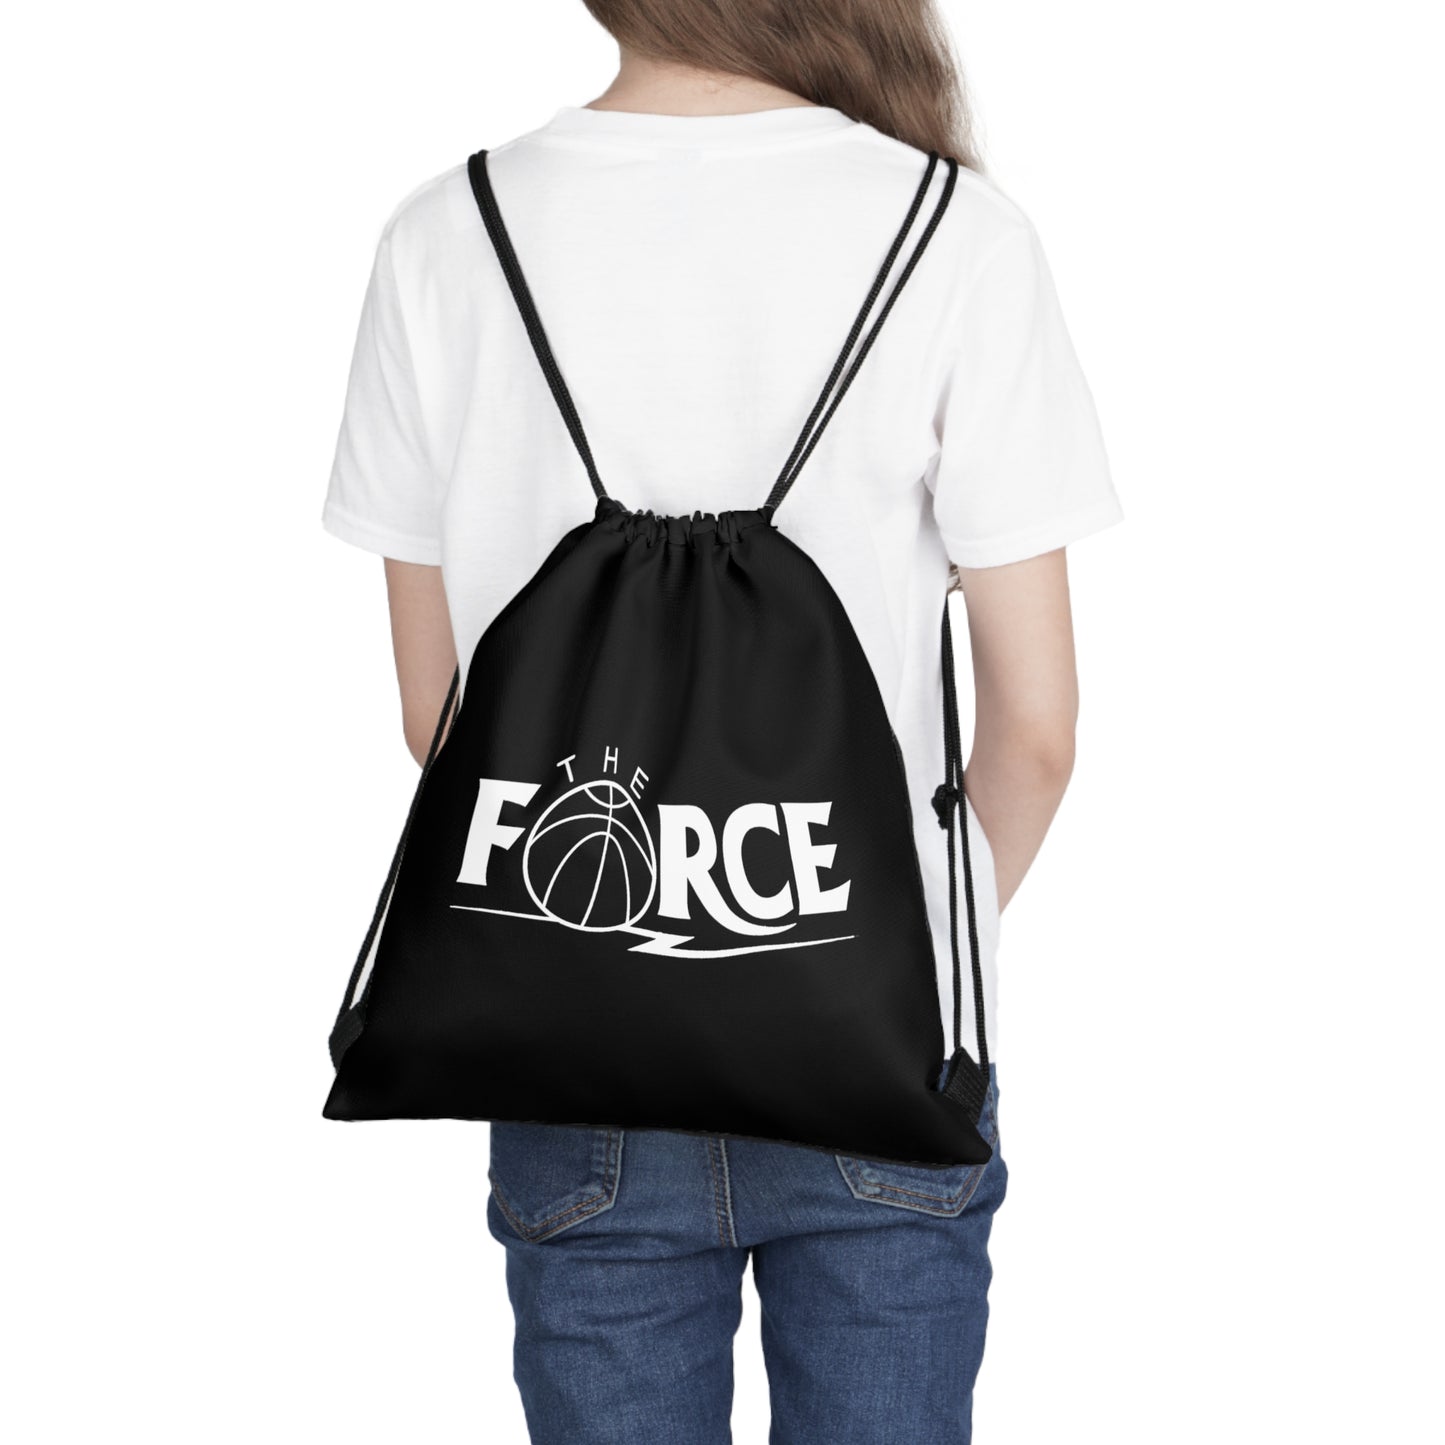 The Force Black Outdoor Drawstring Bag